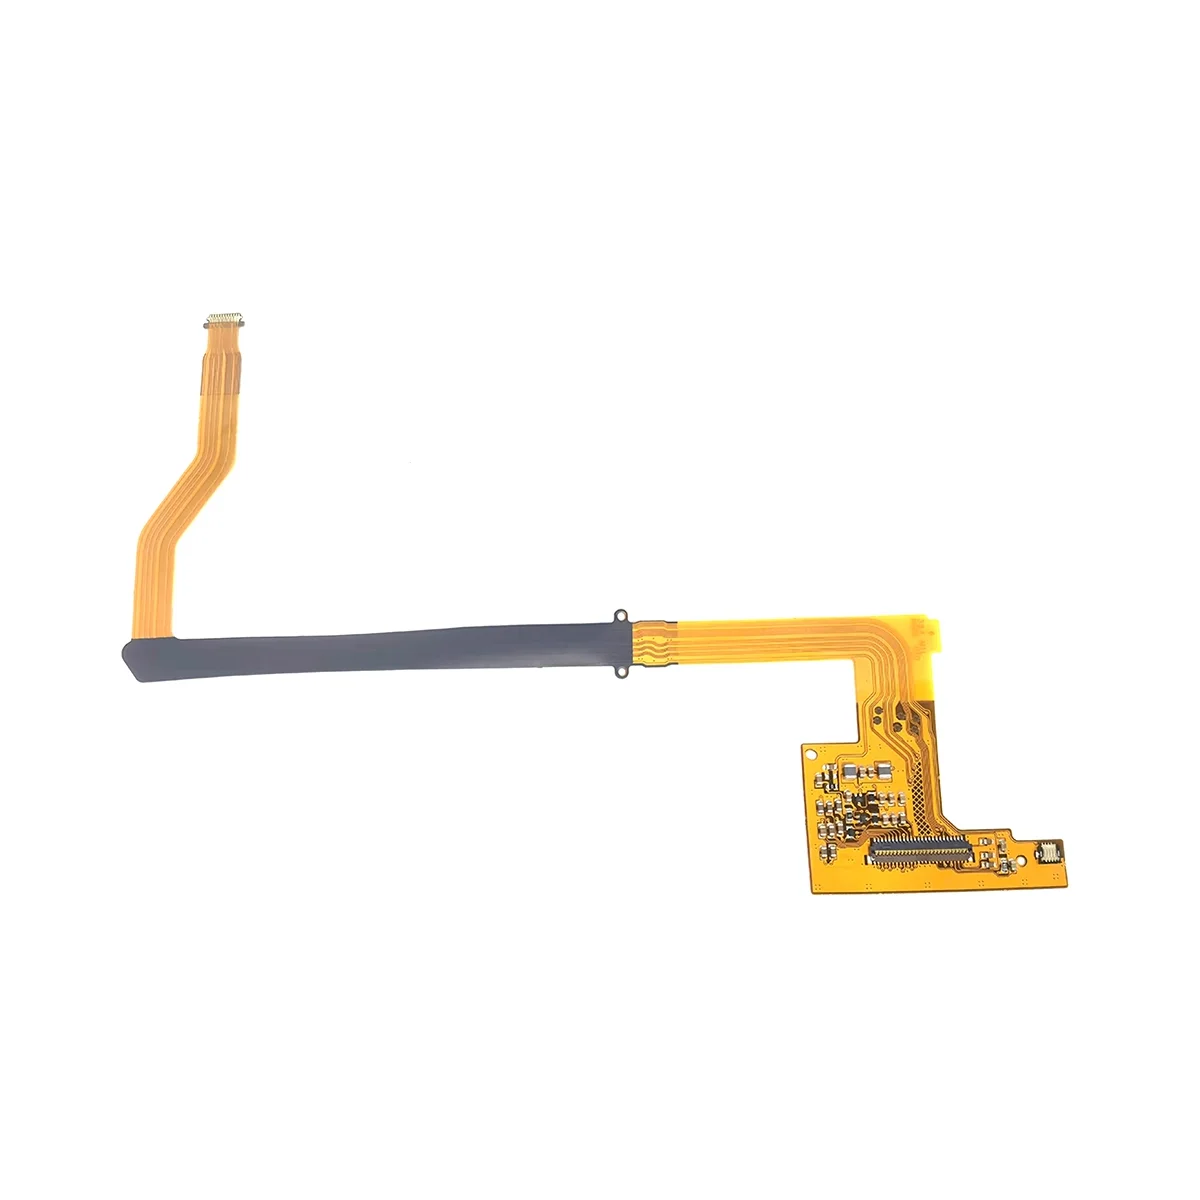 

New Shaft Rotating LCD Flex Cable G1X2 for Canon for Powershot G1X Mark II / G1XII Digital Camera Repair Part